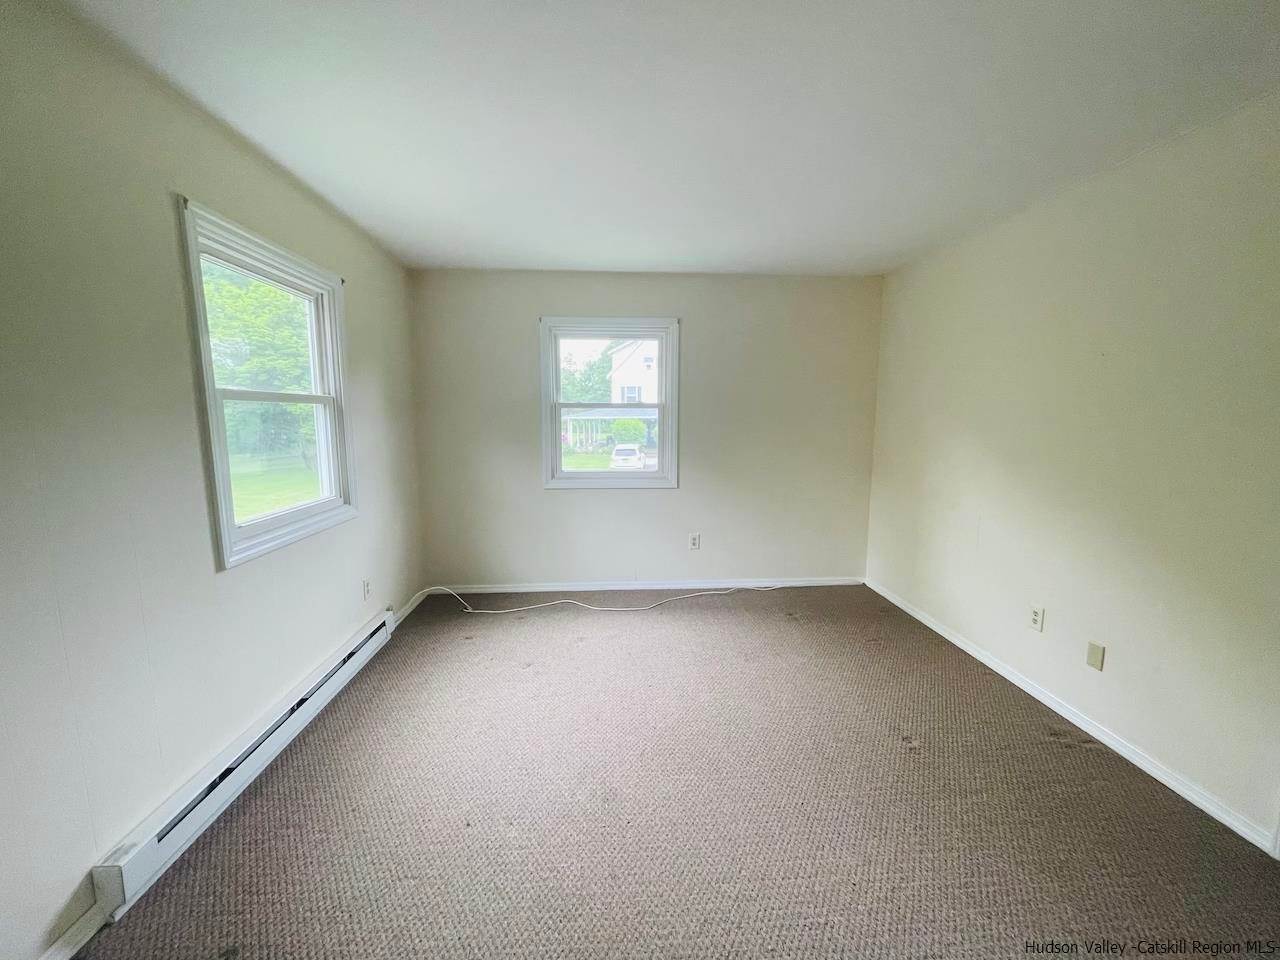 3. Apartments at 13 A Olev Lane New Paltz, New York 12561 United States